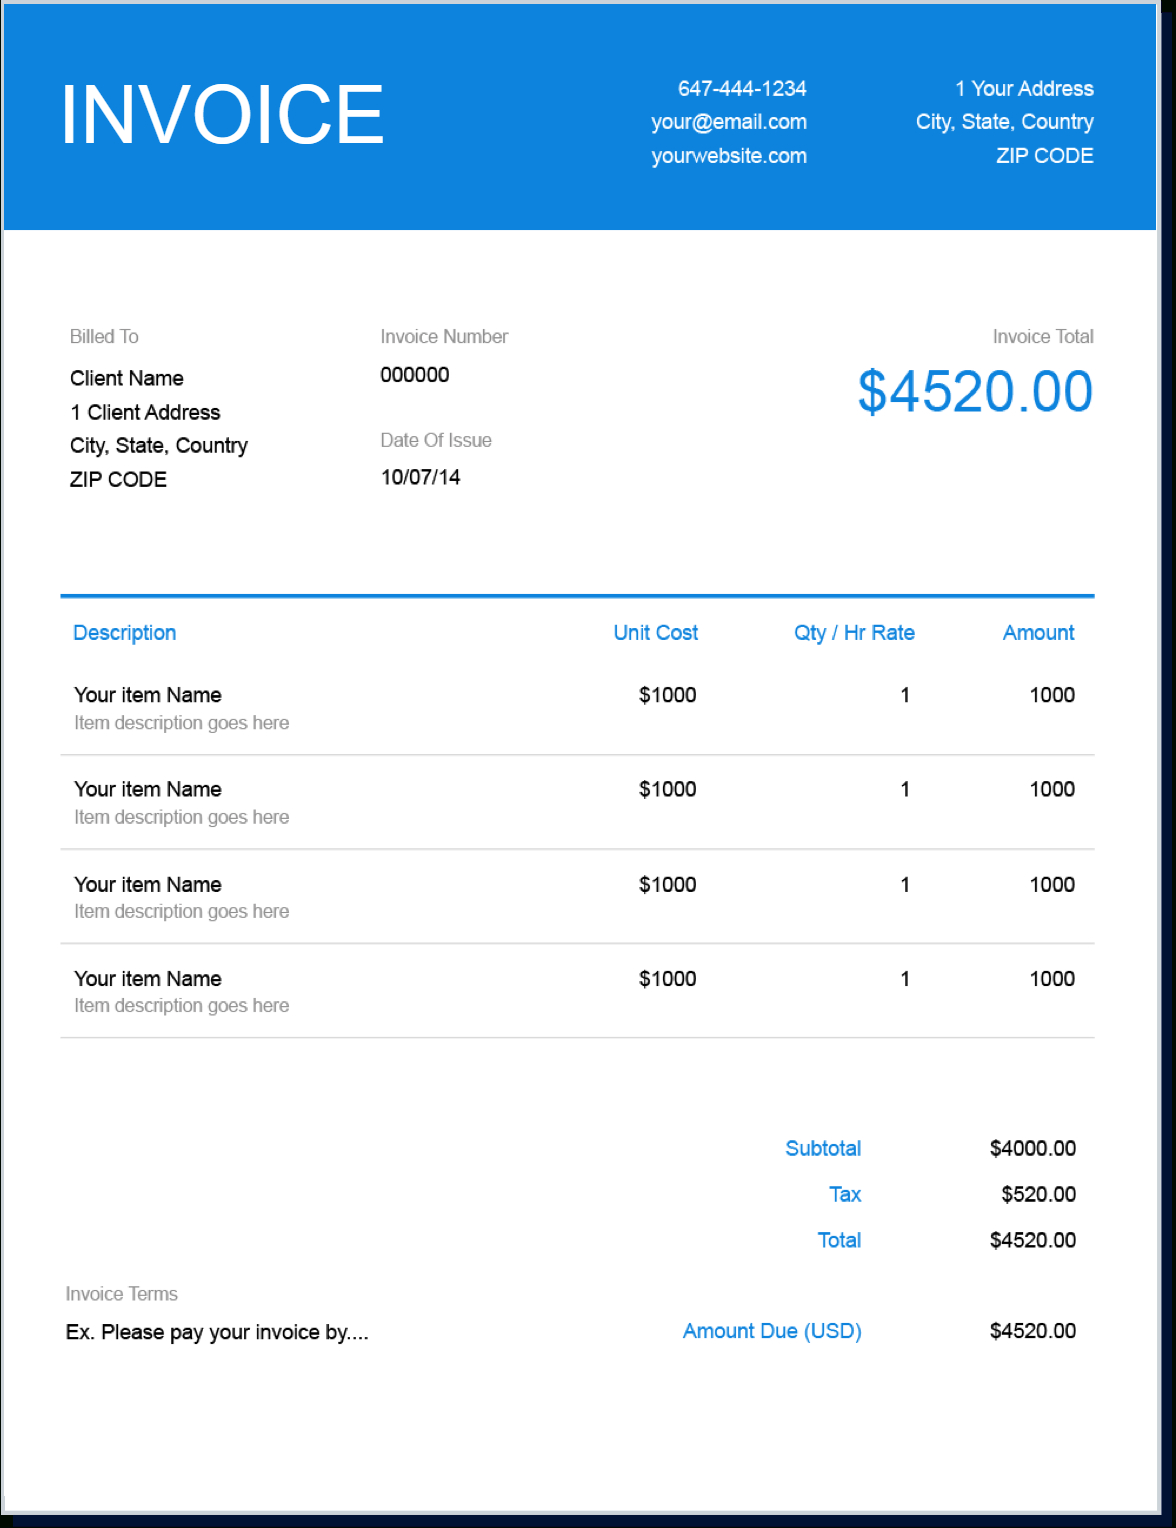 Invoice Template | Create And Send Free Invoices Instantly With Free Downloadable Invoice Template For Word